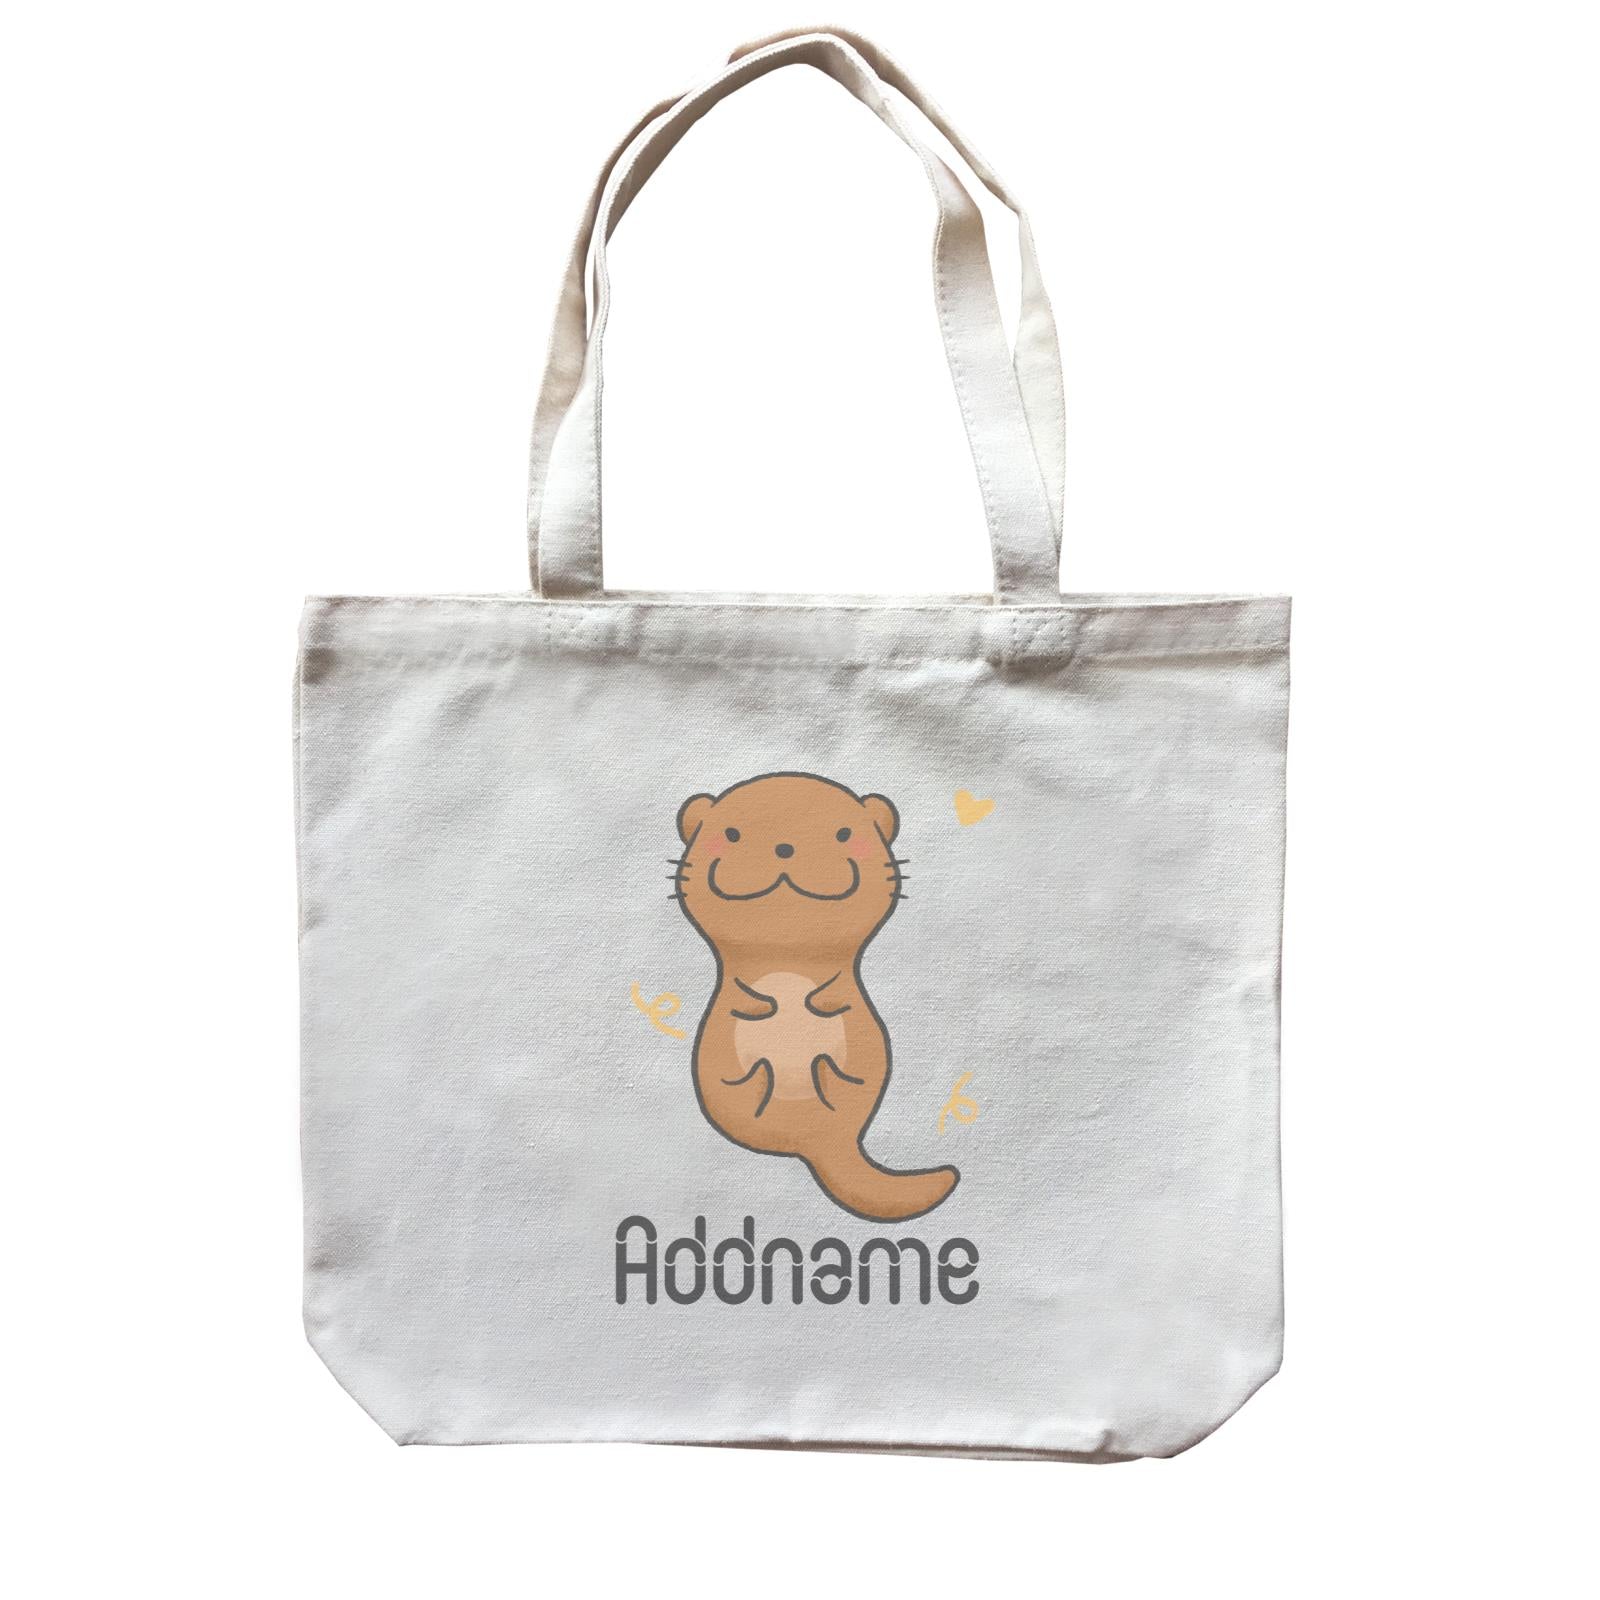 Cute Hand Drawn Style Otter Addname Canvas Bag